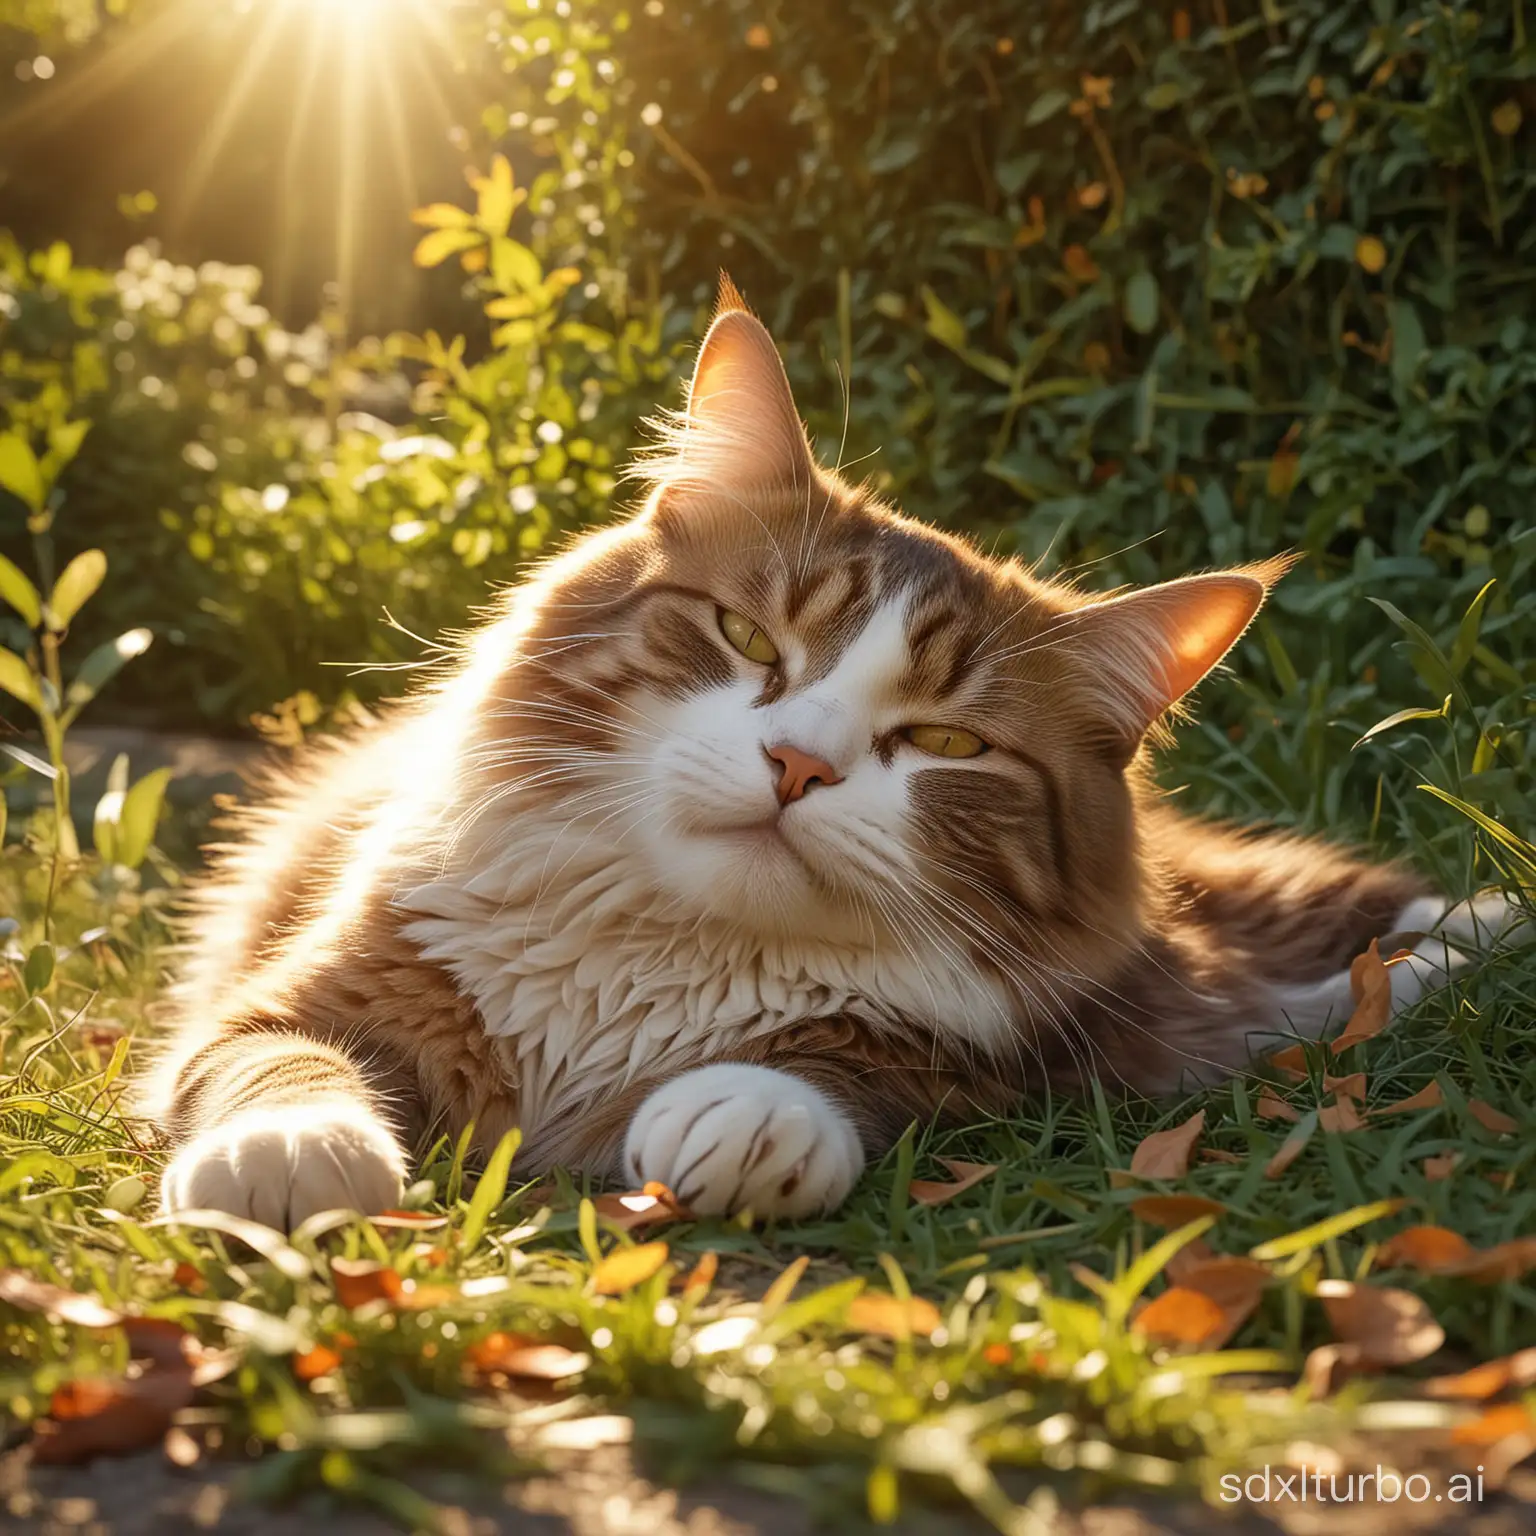 Imagine a domestic cat, of medium size, with soft and silky fur. Its posture is that of peaceful sleep, lying on its back with its legs stretched out in a relaxed manner. The cat rests on a carpet of green grass bathed in the golden light of a setting sun. Sunlight filters through the leaves of nearby trees, creating patterns of shadow and light on the cat's fur.

The cat's face expresses deep tranquility, with its eyes closed and its whiskers slightly quivering. Its breathing is calm and steady. The details of its fur are meticulously depicted, with shades of beige, cream, and brown blending harmoniously. Warm reflections of sunlight accentuate the contours of its body, creating a warm and soothing atmosphere.

Around the cat, you can distinguish some additional elements typical of a garden, such as colorful flowers in the background, fallen leaves scattered on the ground, and perhaps a butterfly fluttering nearby. The environment is imbued with the magical ambiance characteristic of Disney films, where every detail is carefully crafted to evoke the beauty of nature and the sweetness of domestic life.

The entire image exudes a sense of tranquility and happiness, capturing the magical moment when a cat indulges in the simple pleasure of basking in the sun. The artistic style is faithful to that of Disney animations, with soft lines, vibrant colors, and special attention to the expressions and emotions of the characters. Each element of the image contributes to creating an immersive and captivating scene, inviting the viewer to get lost in this moment of pure enchantment.